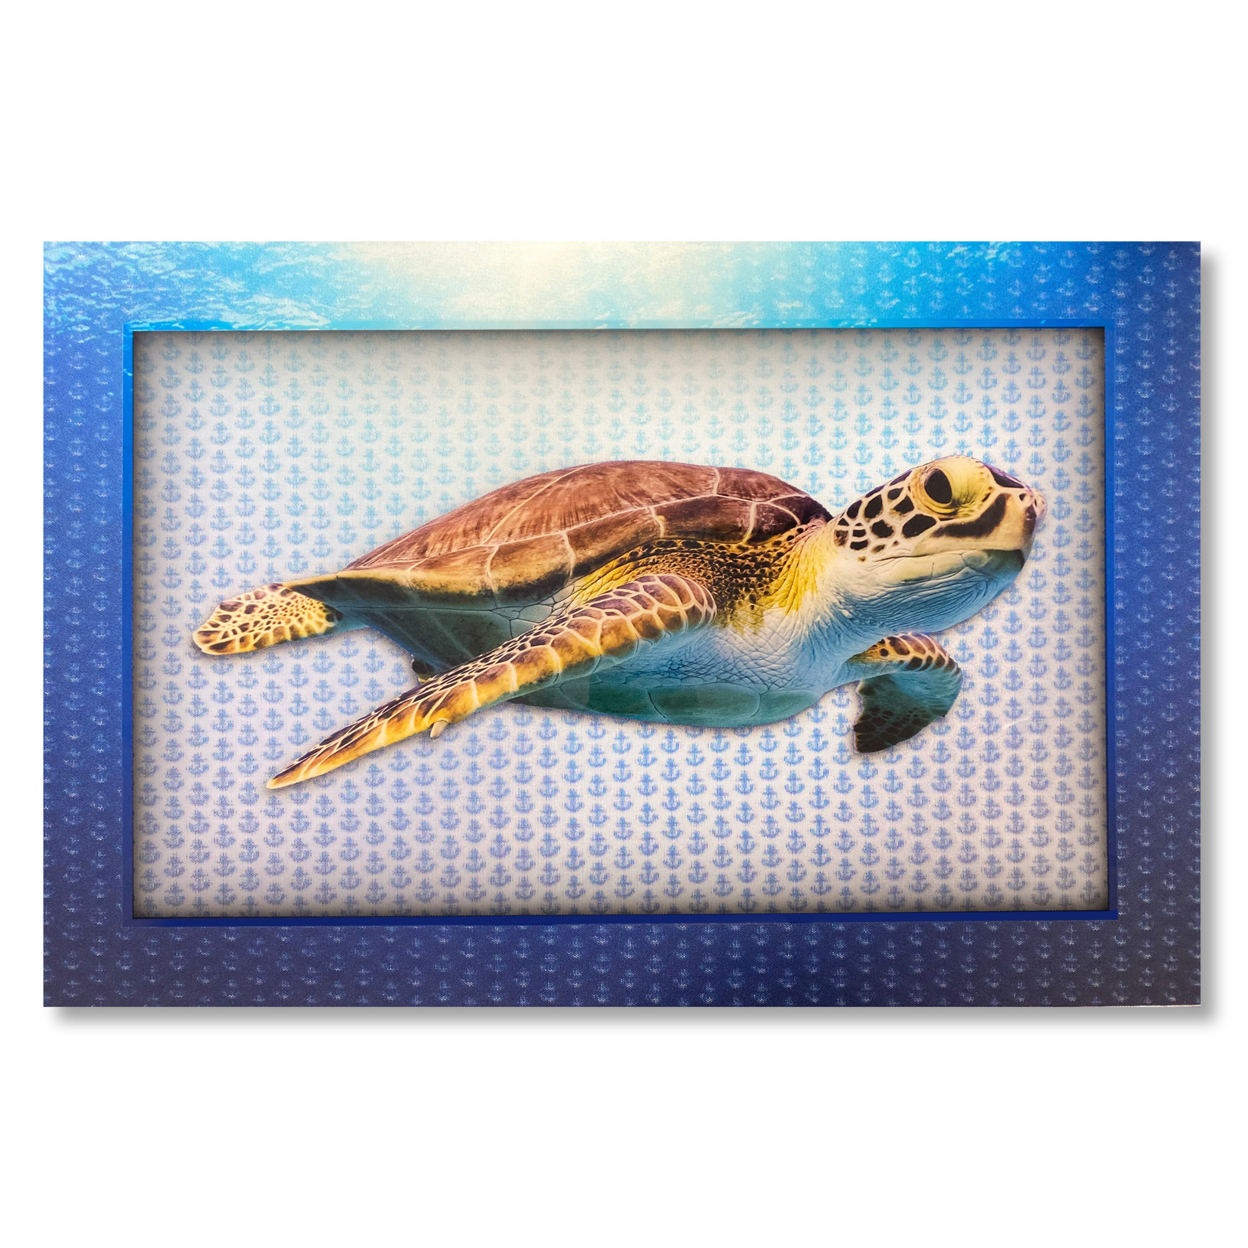 5D Multi-Dimensional Wall Art - Custom Made Turtle Wall Art Print On Strong Polycarbonate Panel W/ Vibrant Colors By Matashi (16x20 In)